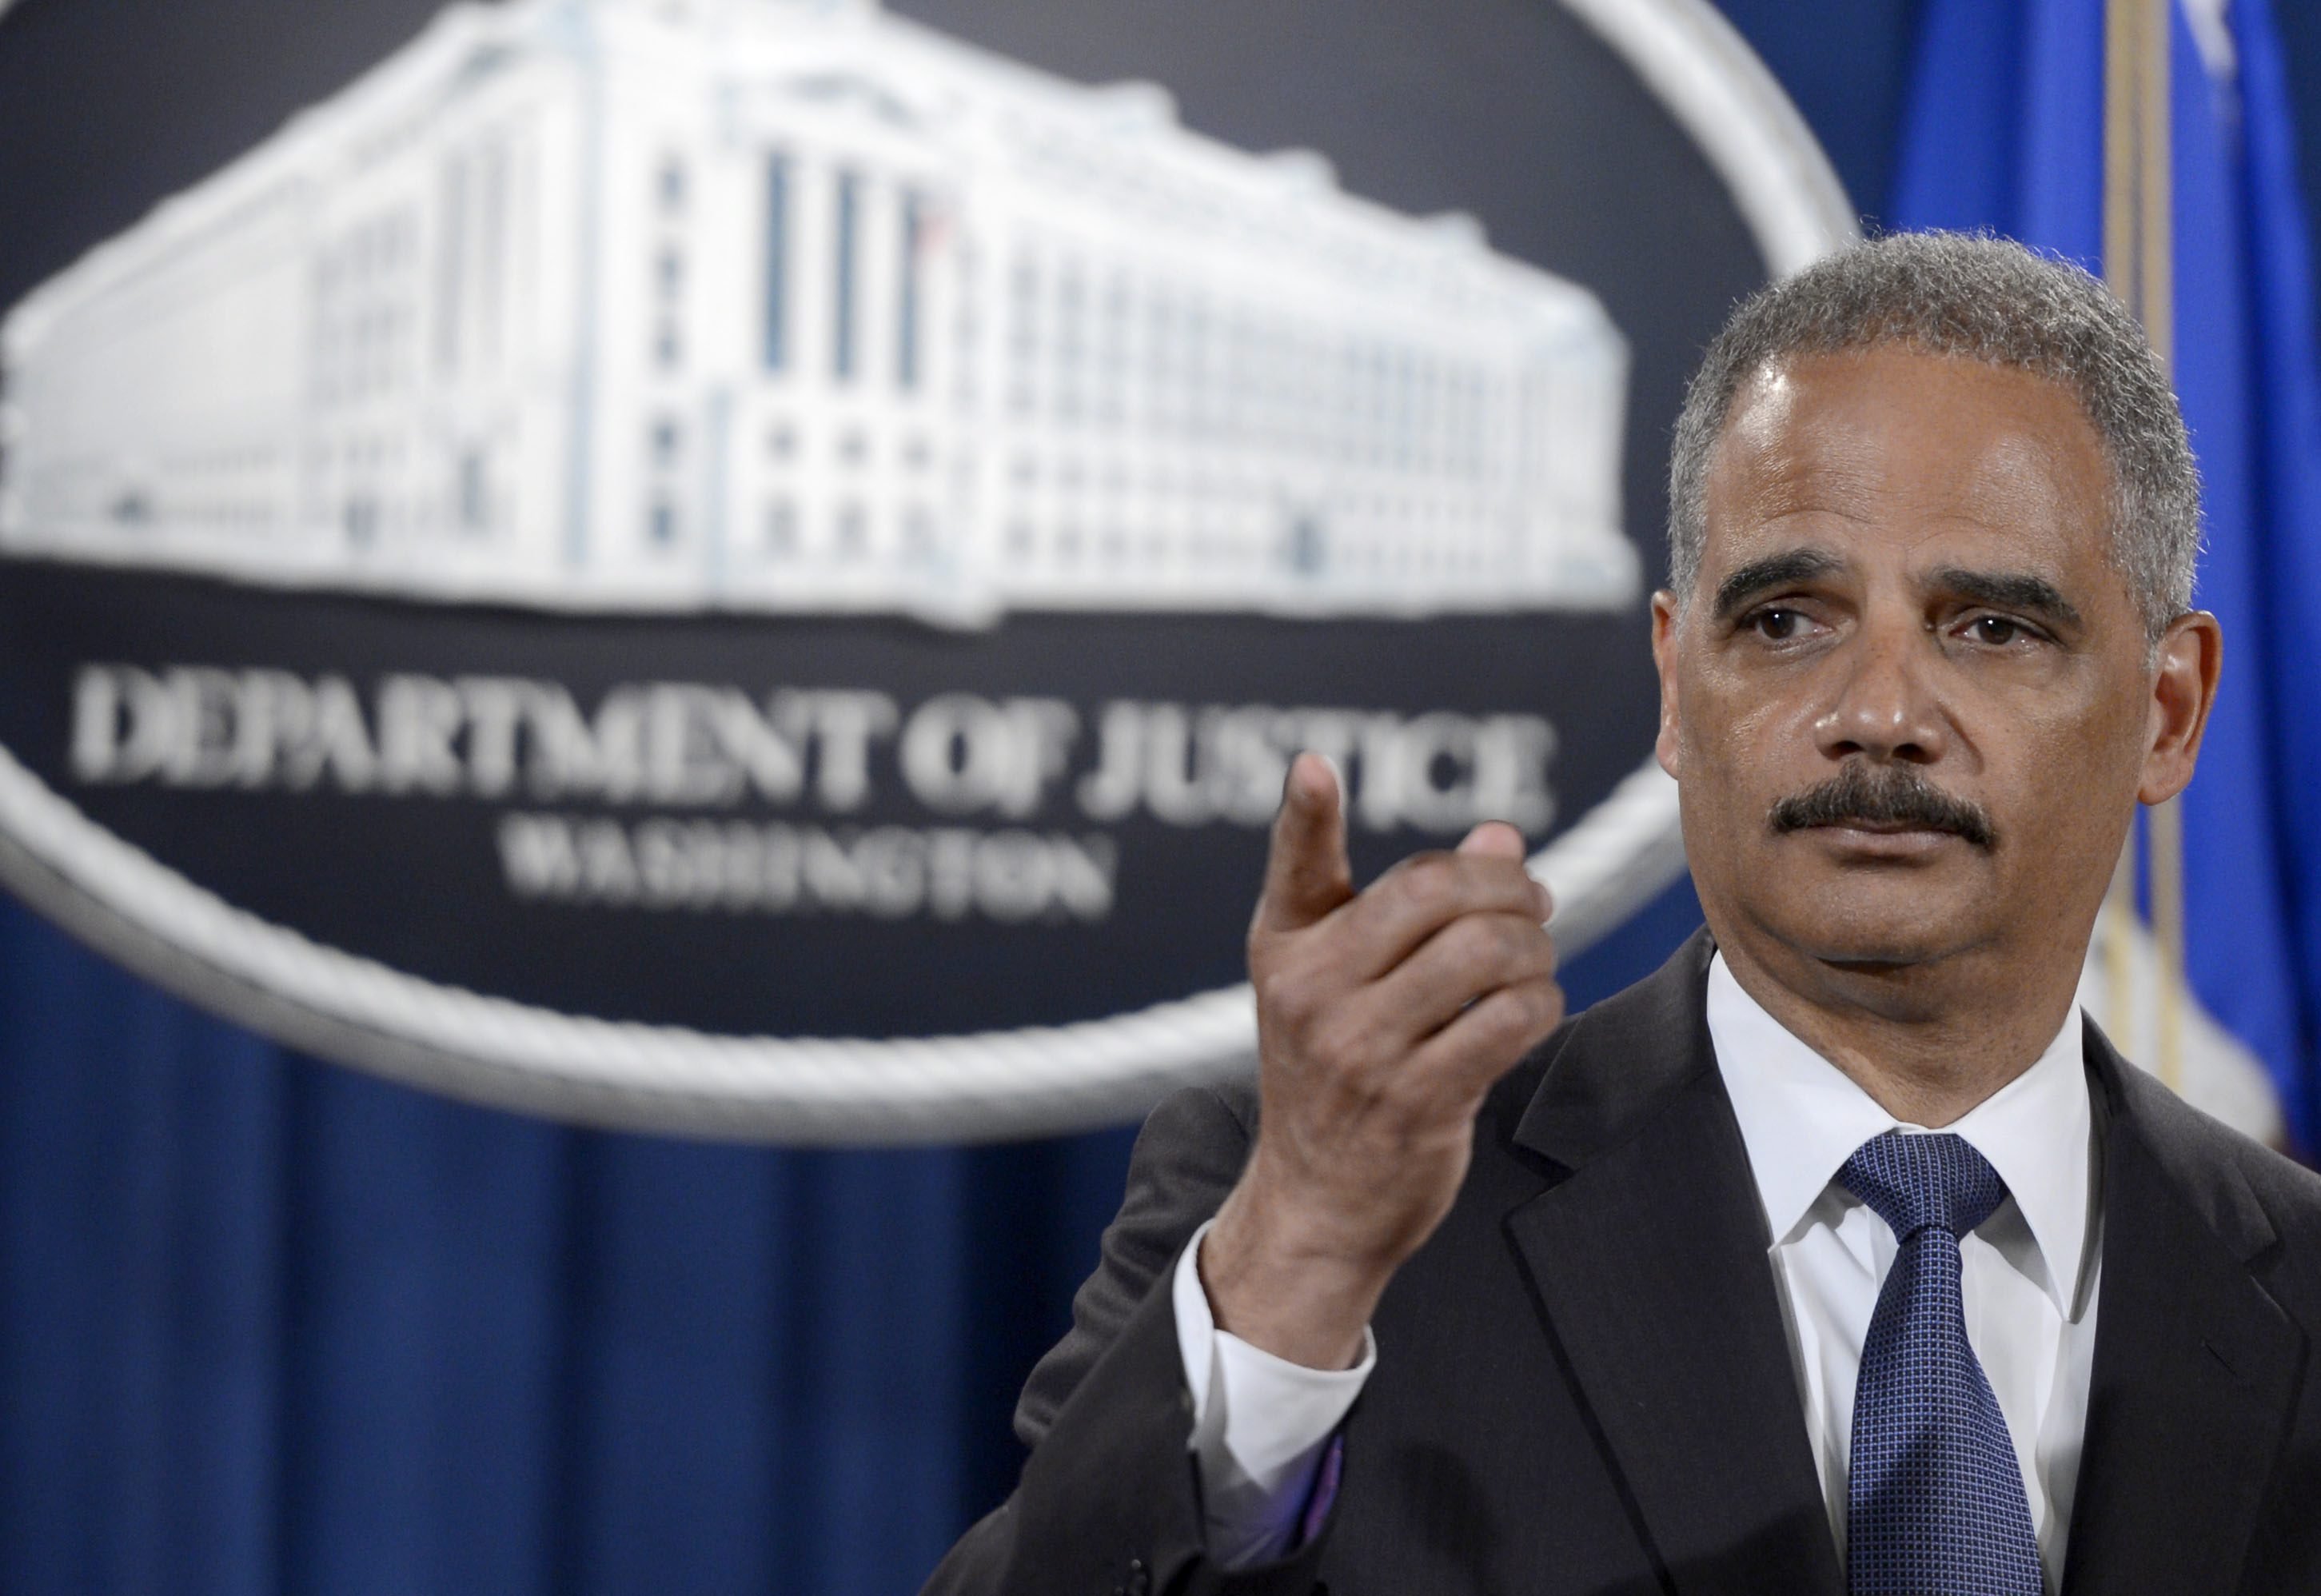 US Attorney General Eric Holder responds to a question from the news media on the Justice Department’s efforts in Ferguson, Missouri during a press conference at the Justice Department in Washington, DC, on Sept. 4, 2014. (Shawn Thew—EPA)